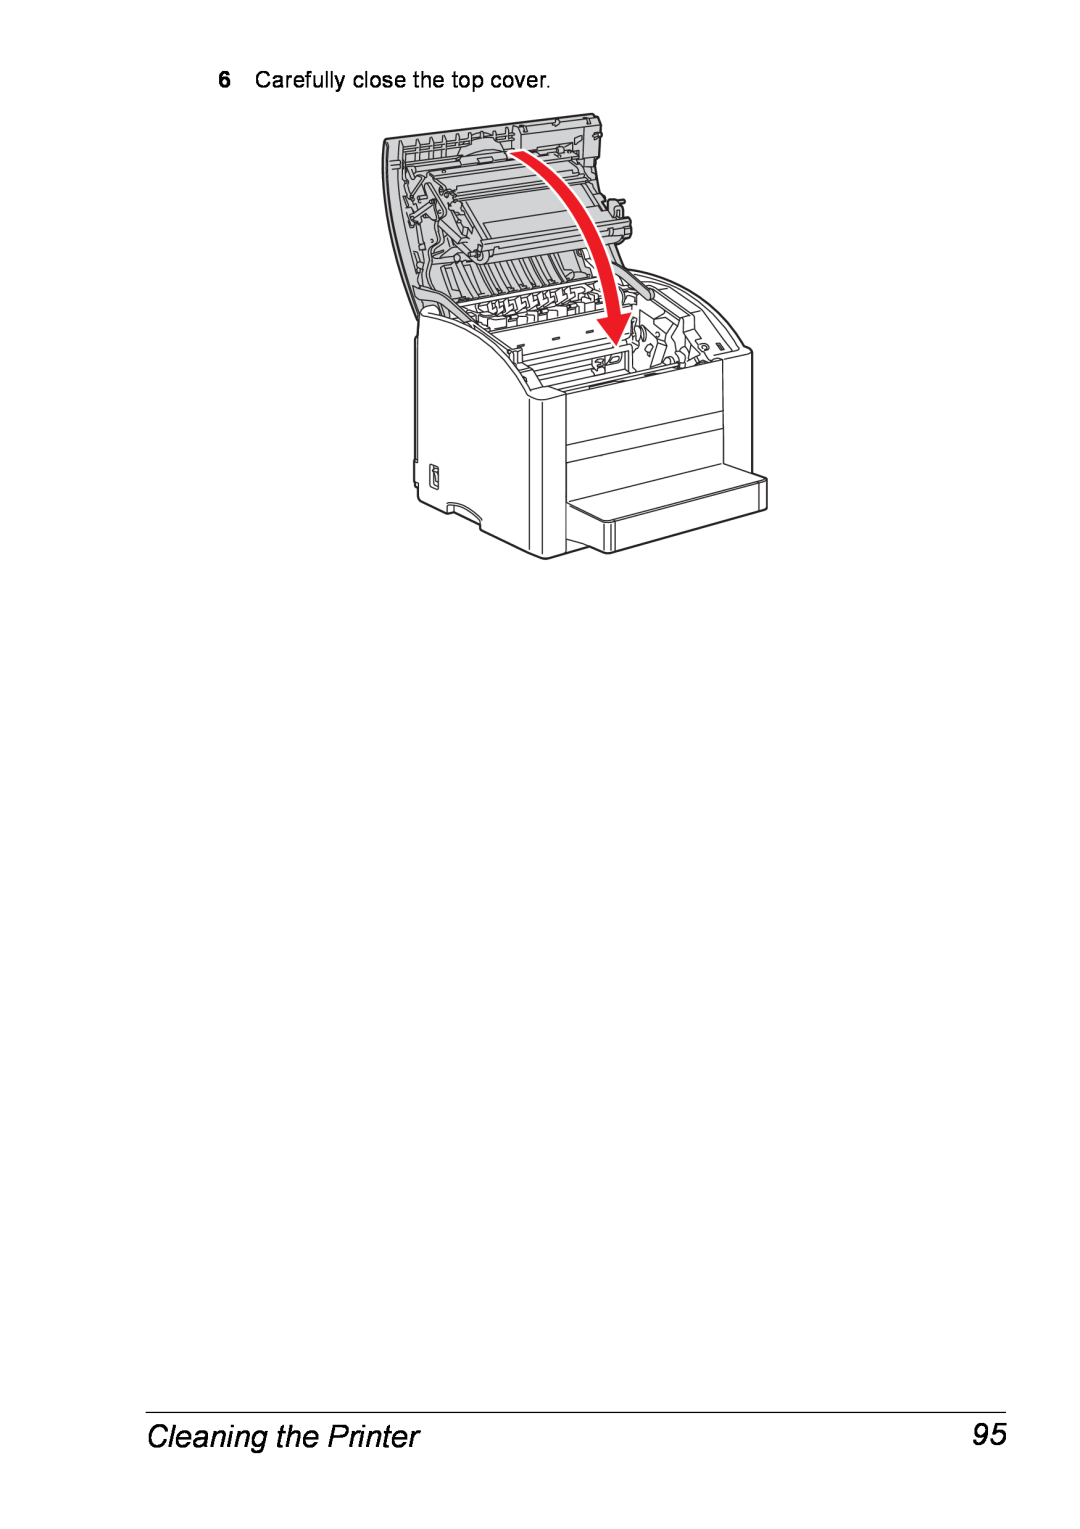 Xerox 6120 manual Cleaning the Printer, Carefully close the top cover 